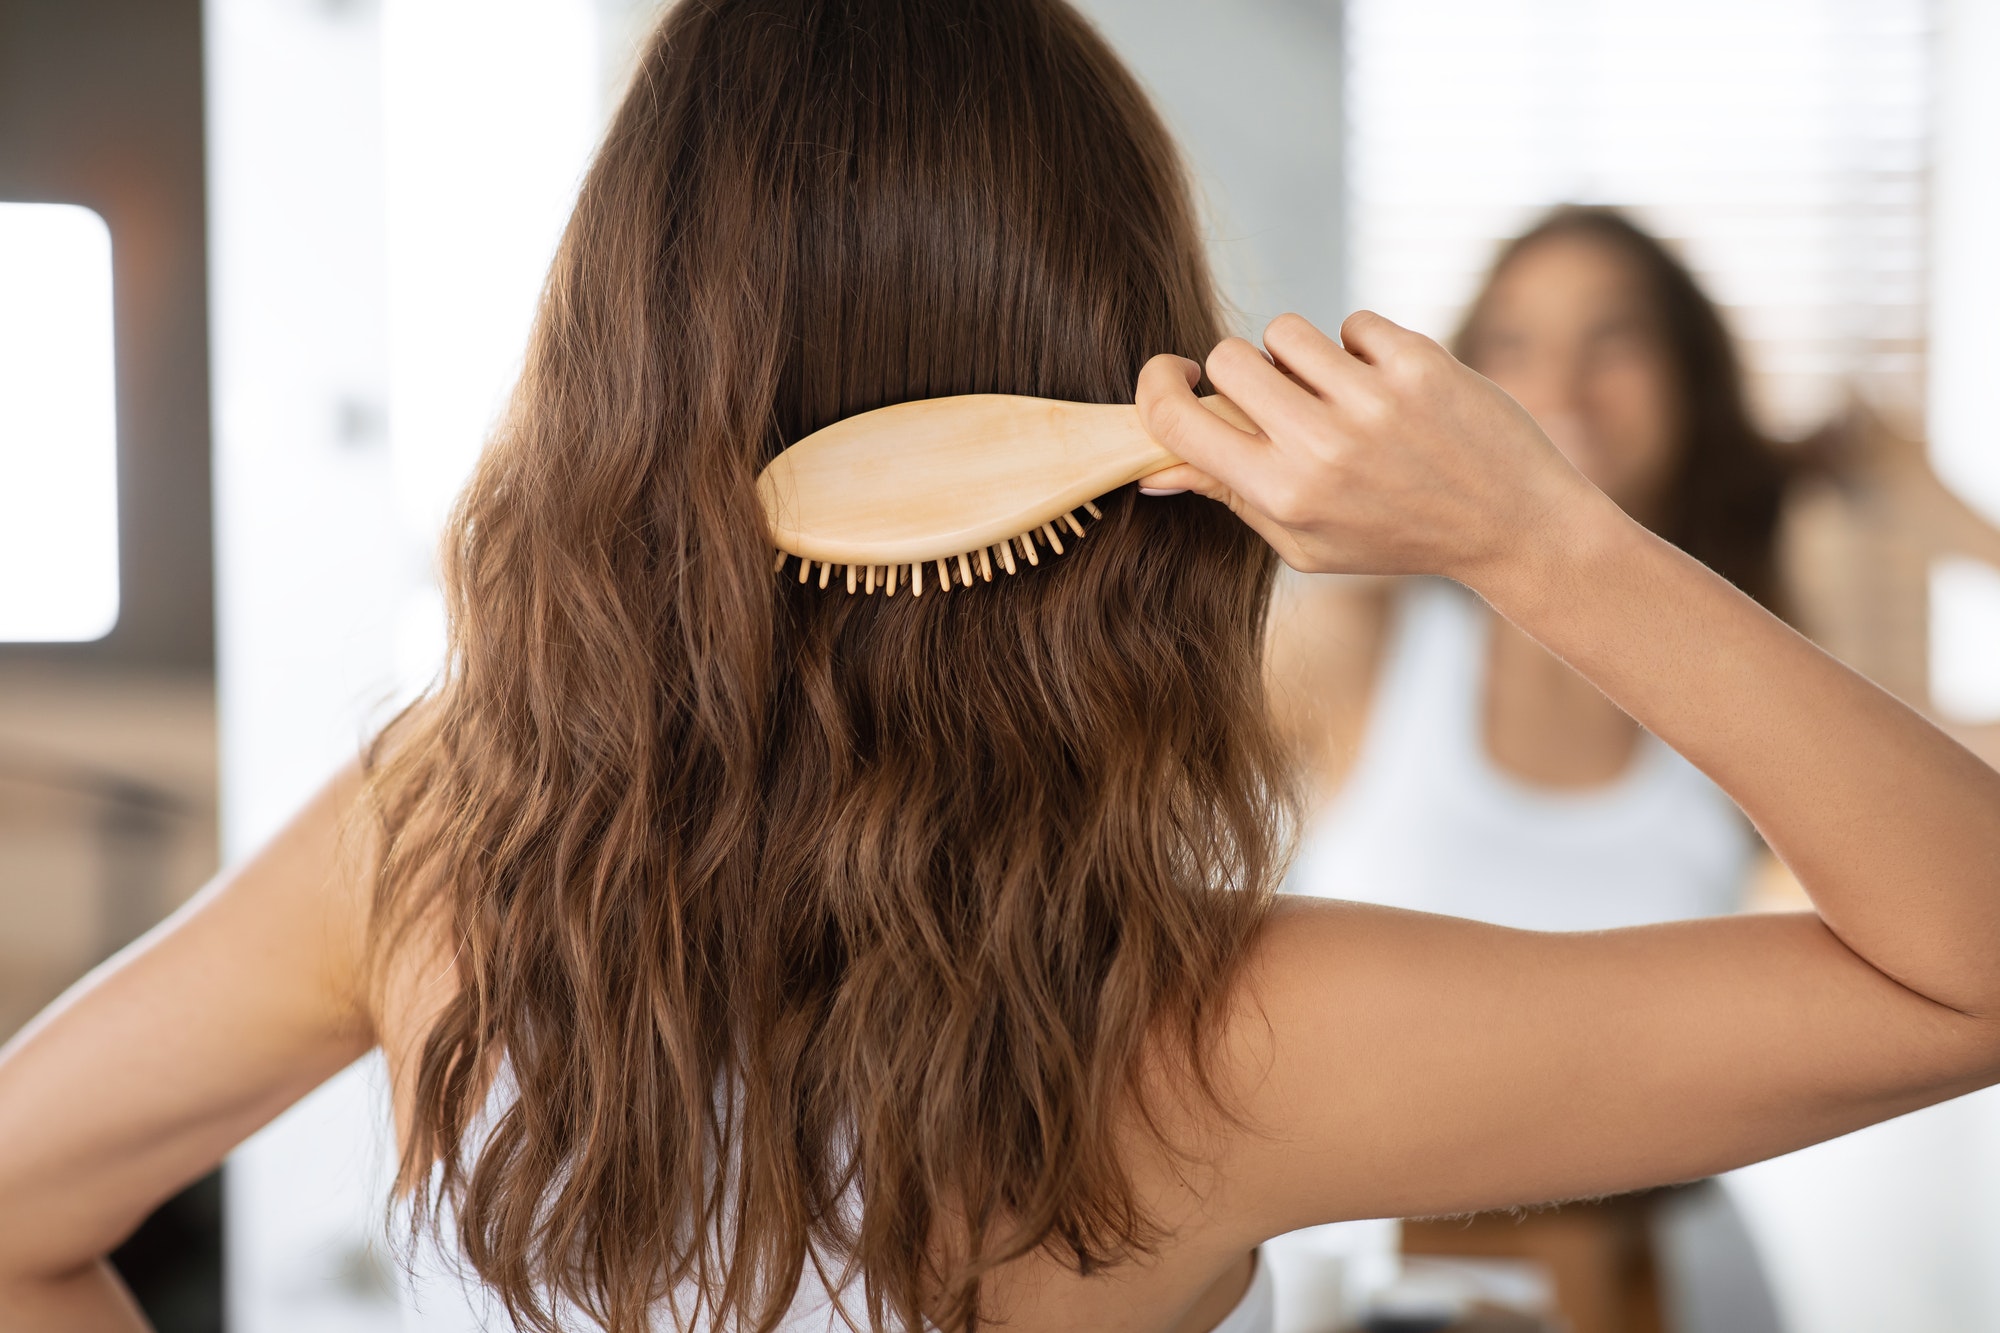 Lady Brushing Hair With Wooden Hairbrush In Bathroom, Rear View